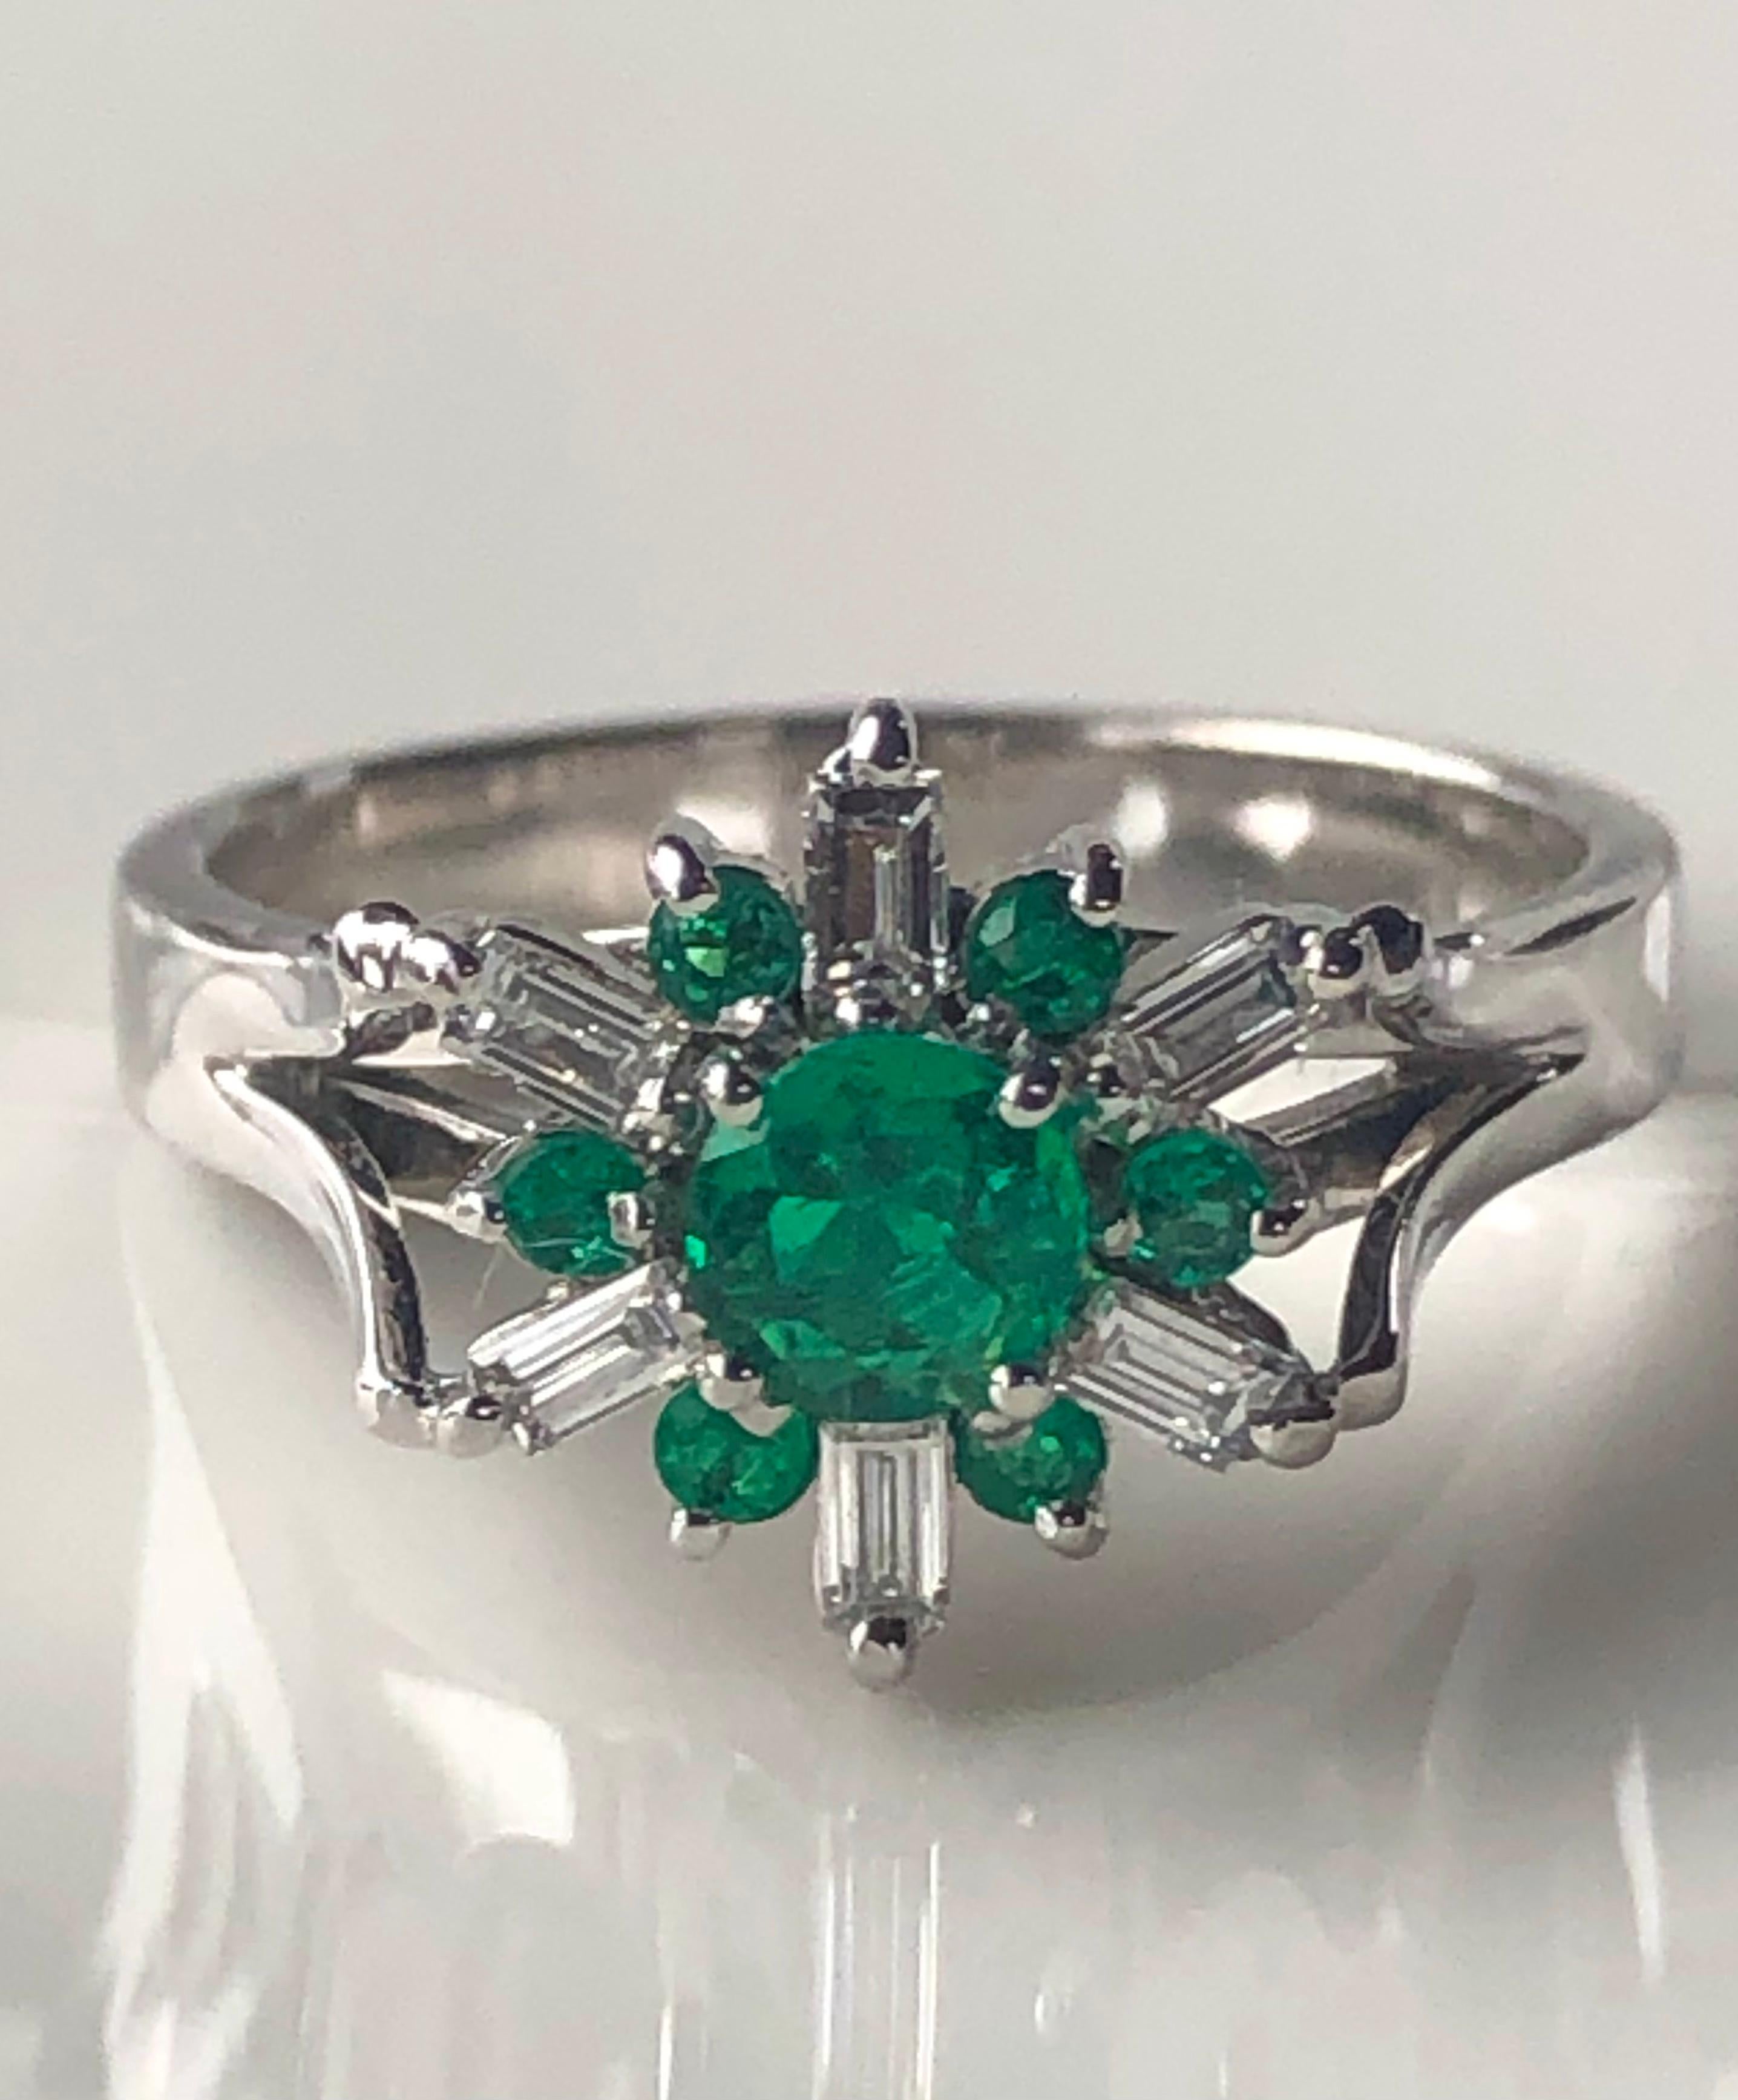 1.50 CT Natural Round Colombian Emerald & Diamond Art Deco style Cocktail Ring 18K White Gold

Composition: 18K White Gold
Primary Stone: AAA+ Natural Colombian Emerald
Shape or Cut: Round Cut 
Average Color: AAA+ Beautiful Natural Medium Green